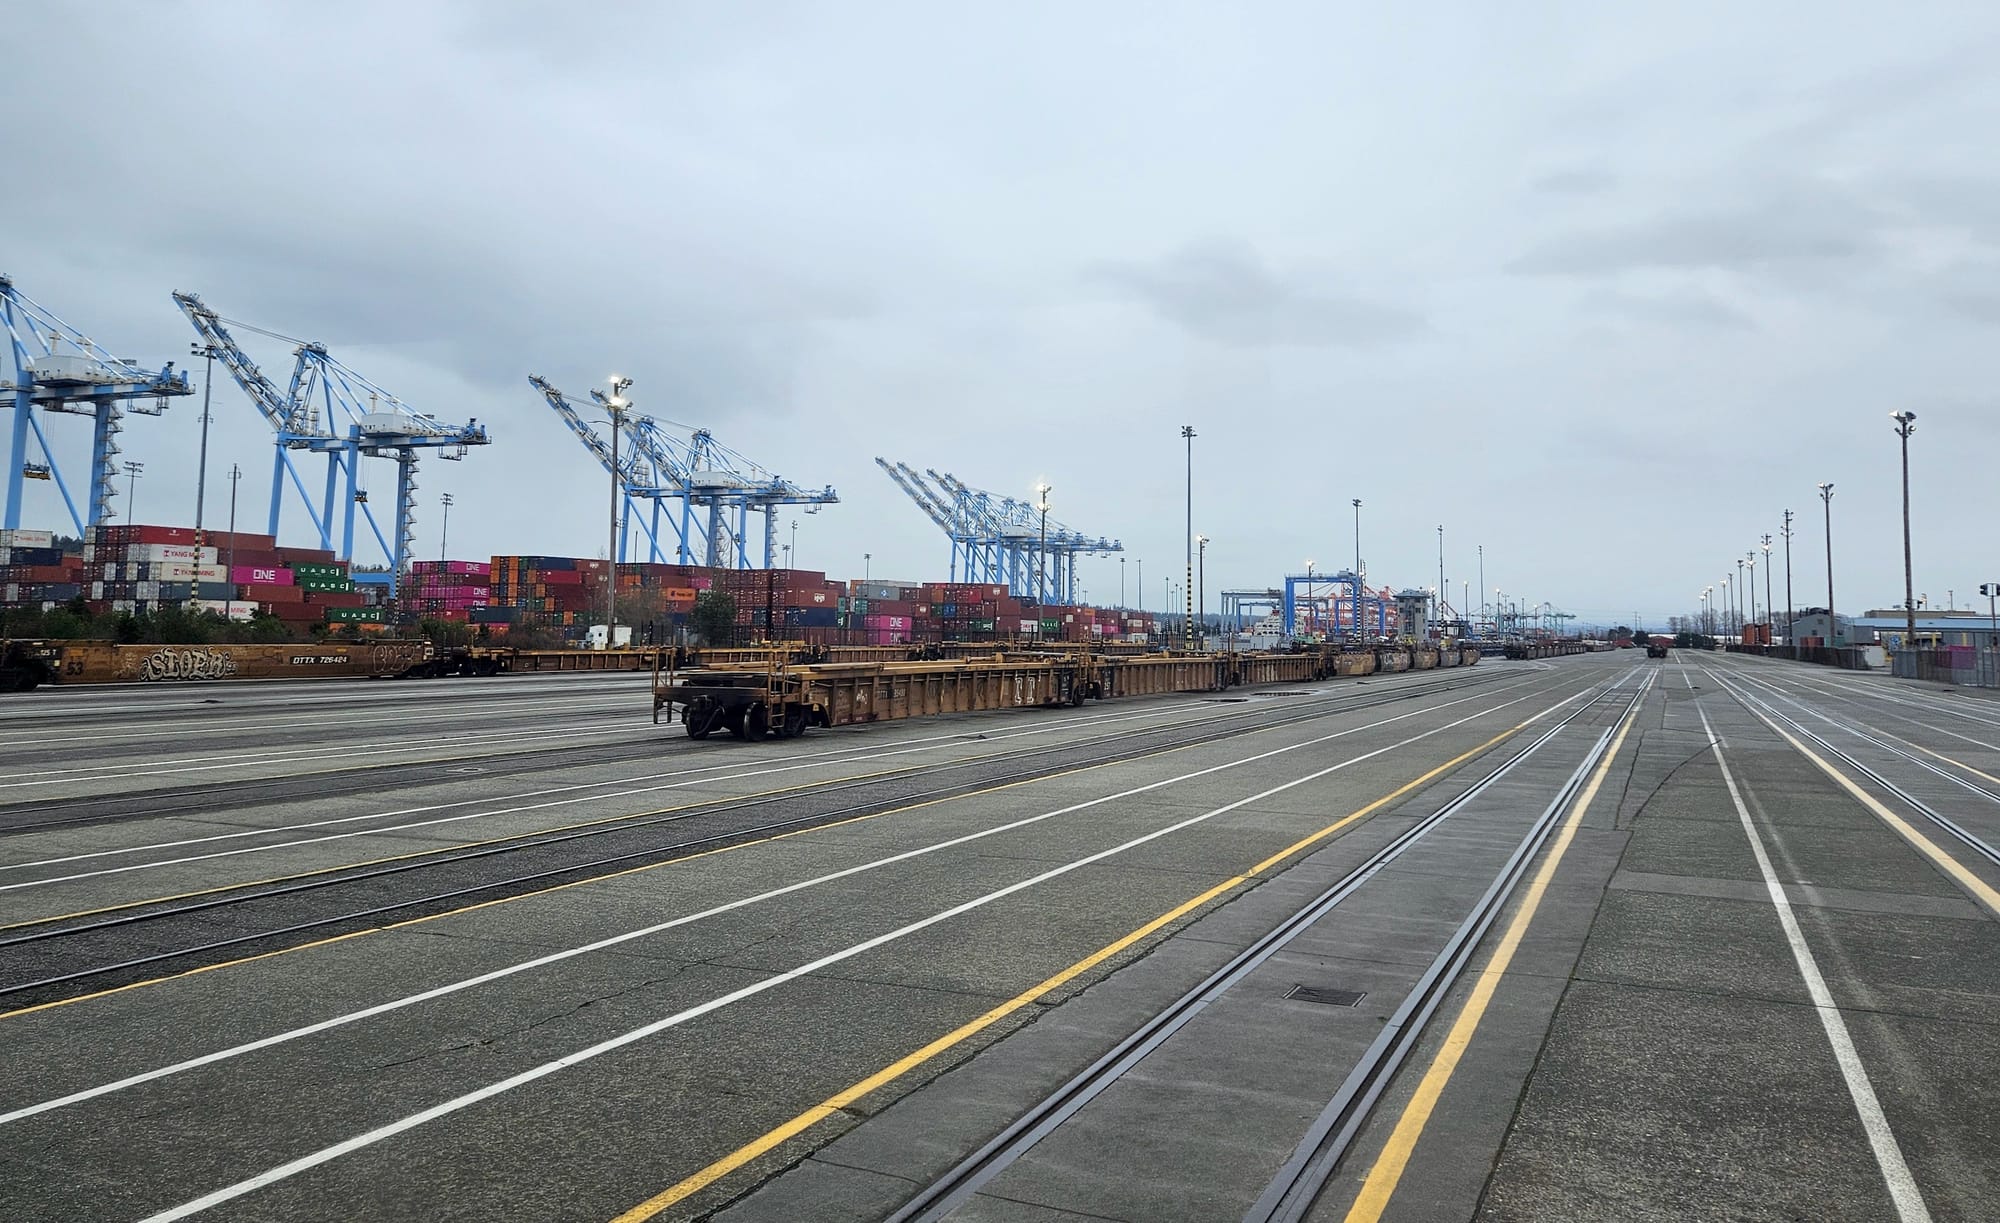 Half a dozen railroad tracks next to each other on a large concrete area with shipping containers and cranes in the background.